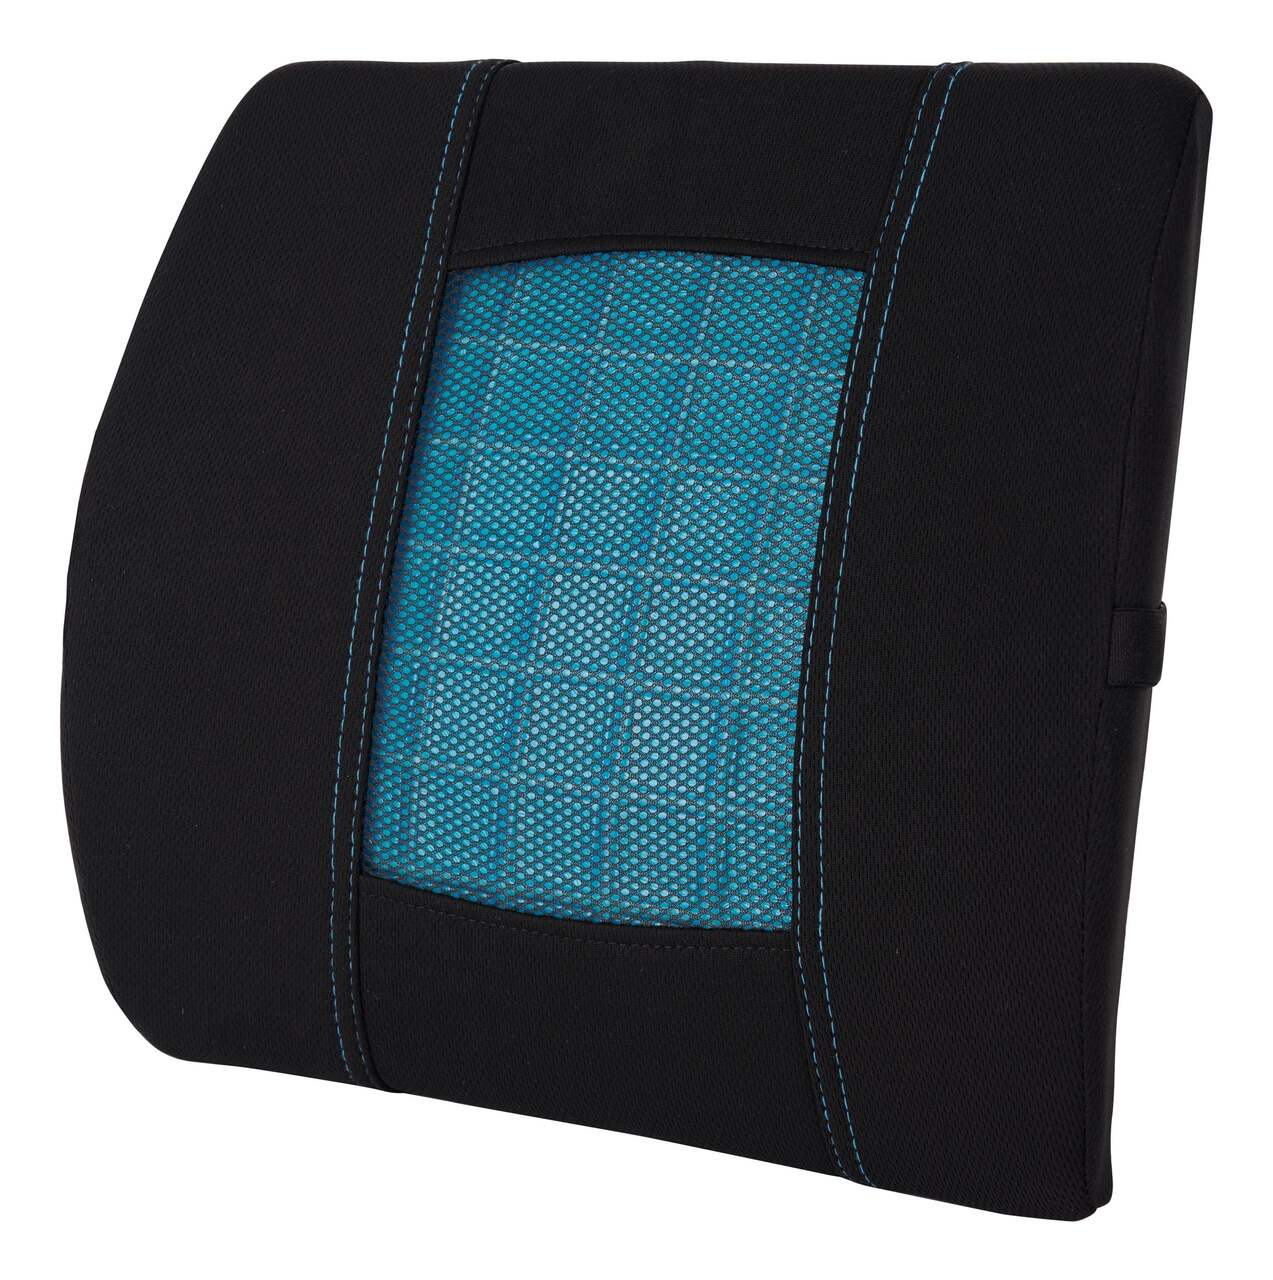 Back Lumbar Low Back Support cushion for your bed or for lounging